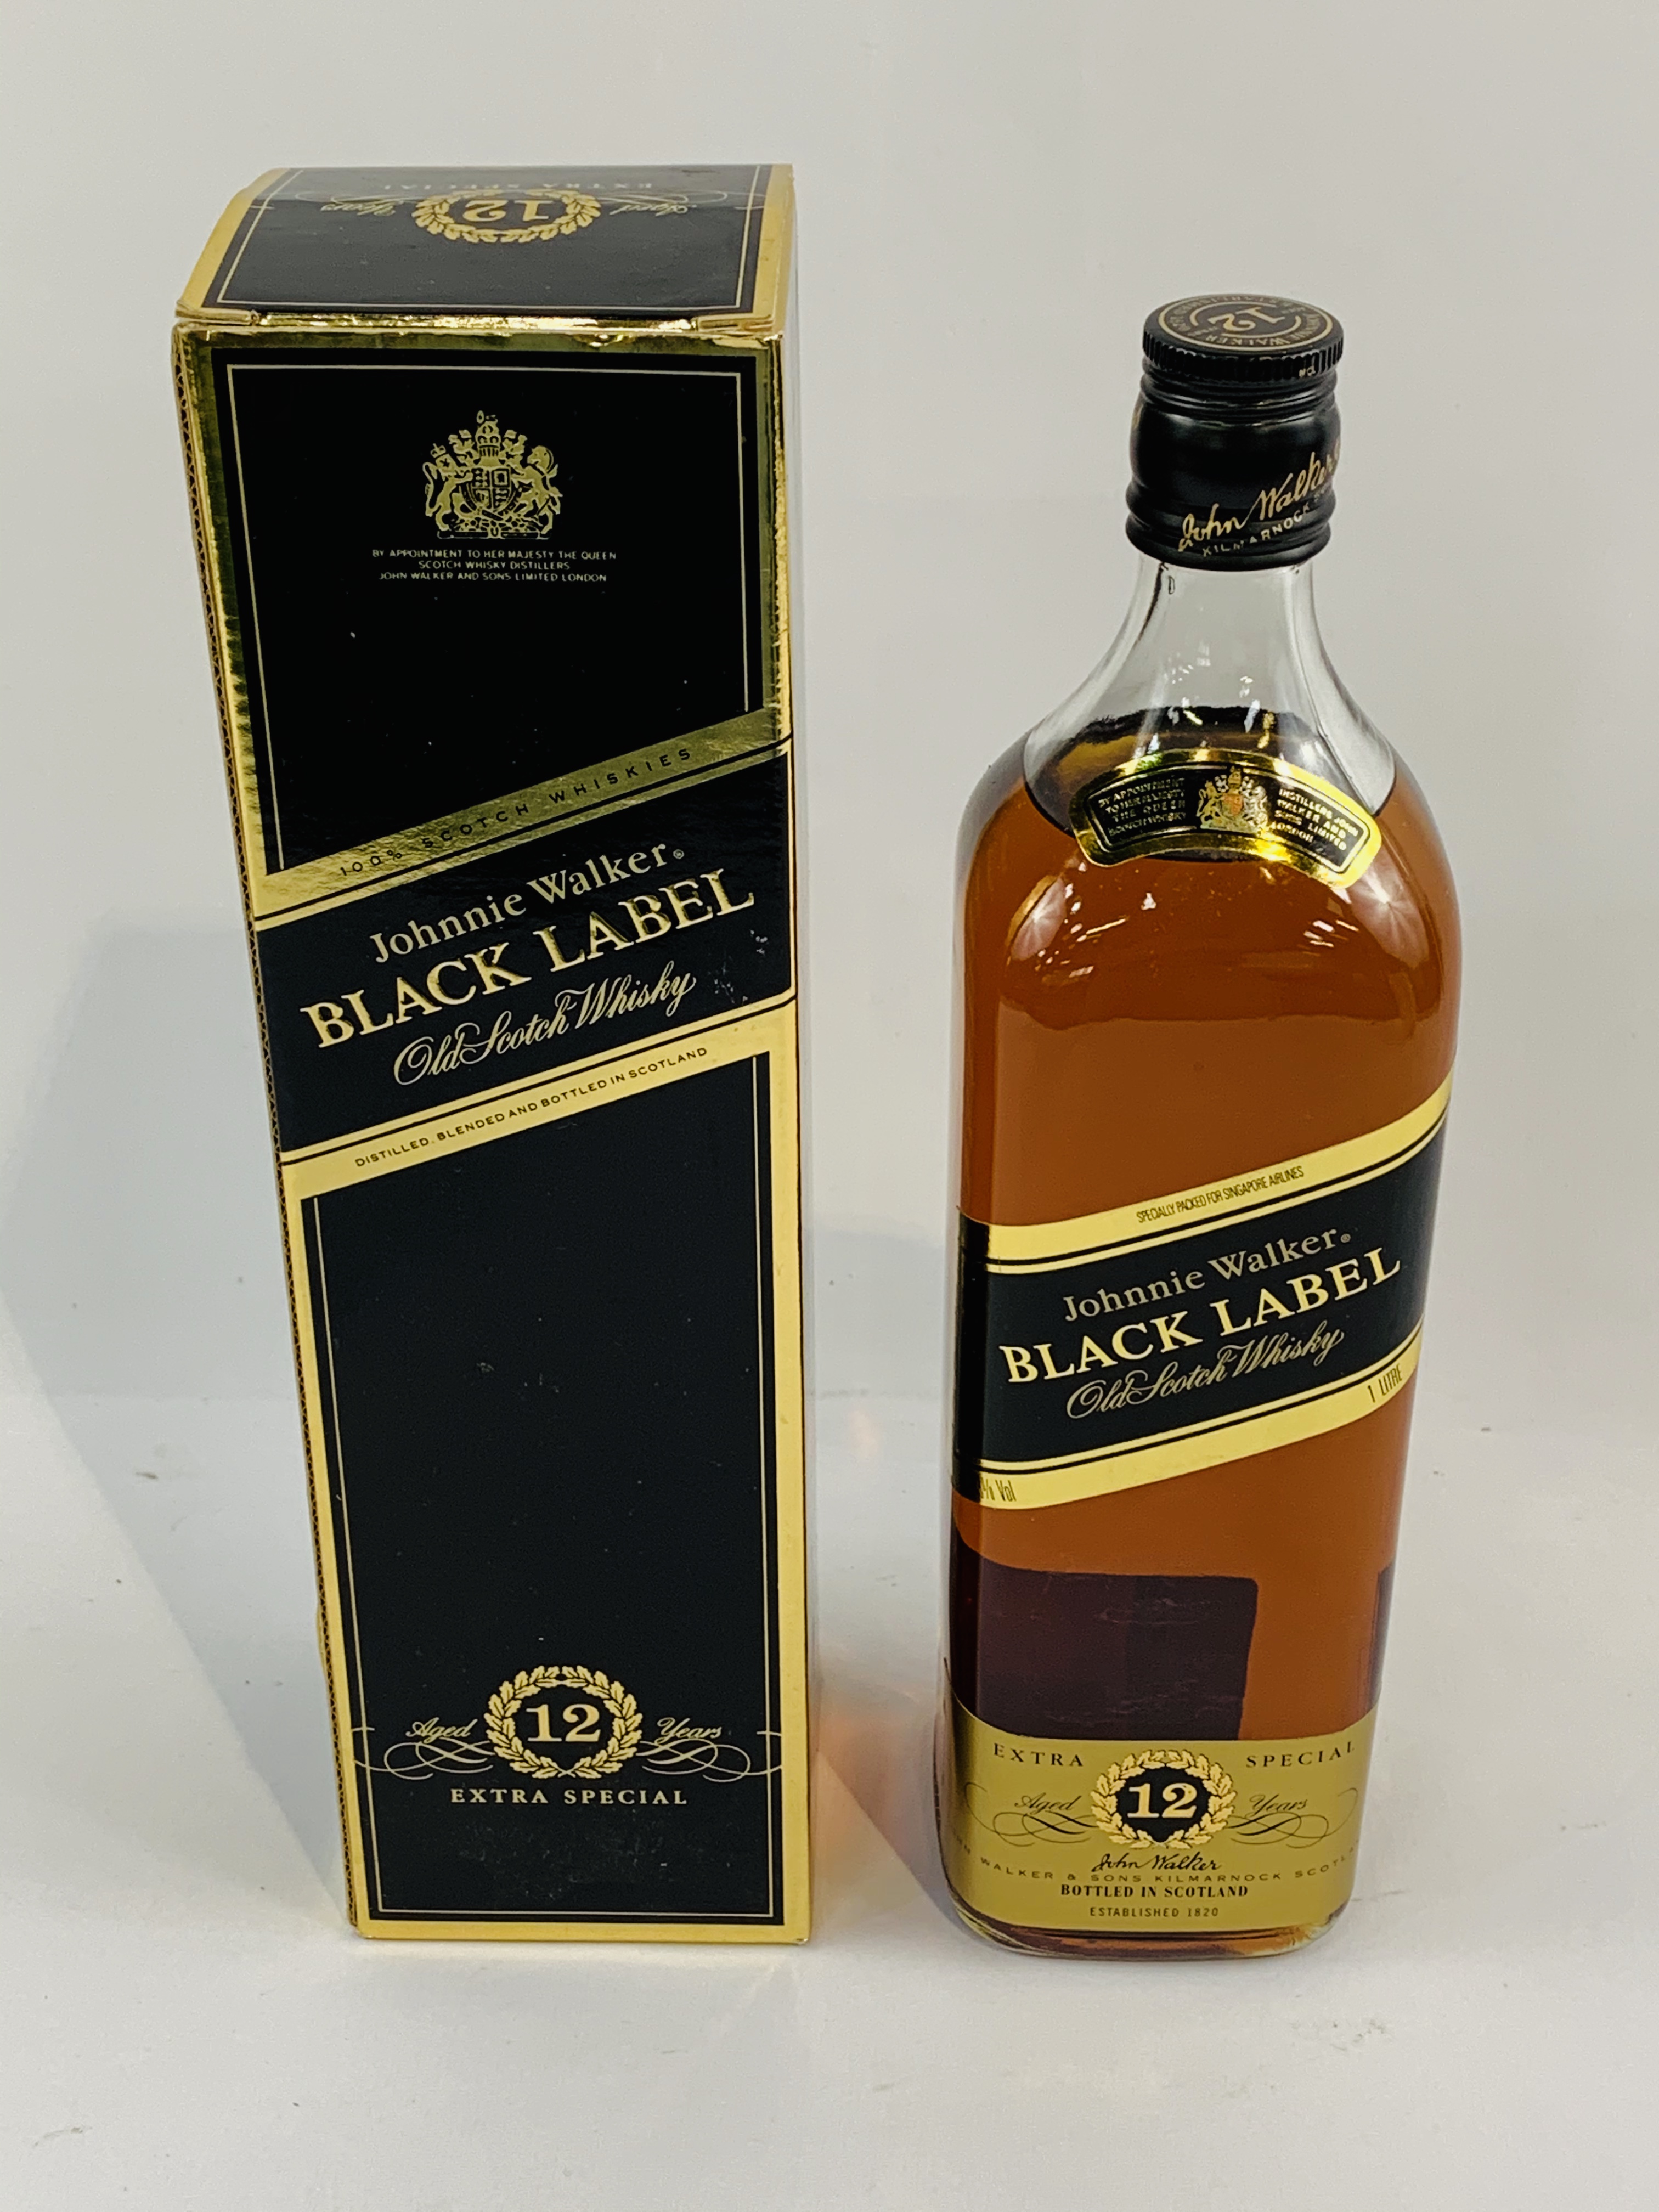 One litre bottle of Johnny Walker Black Label Whisky, new and in box.